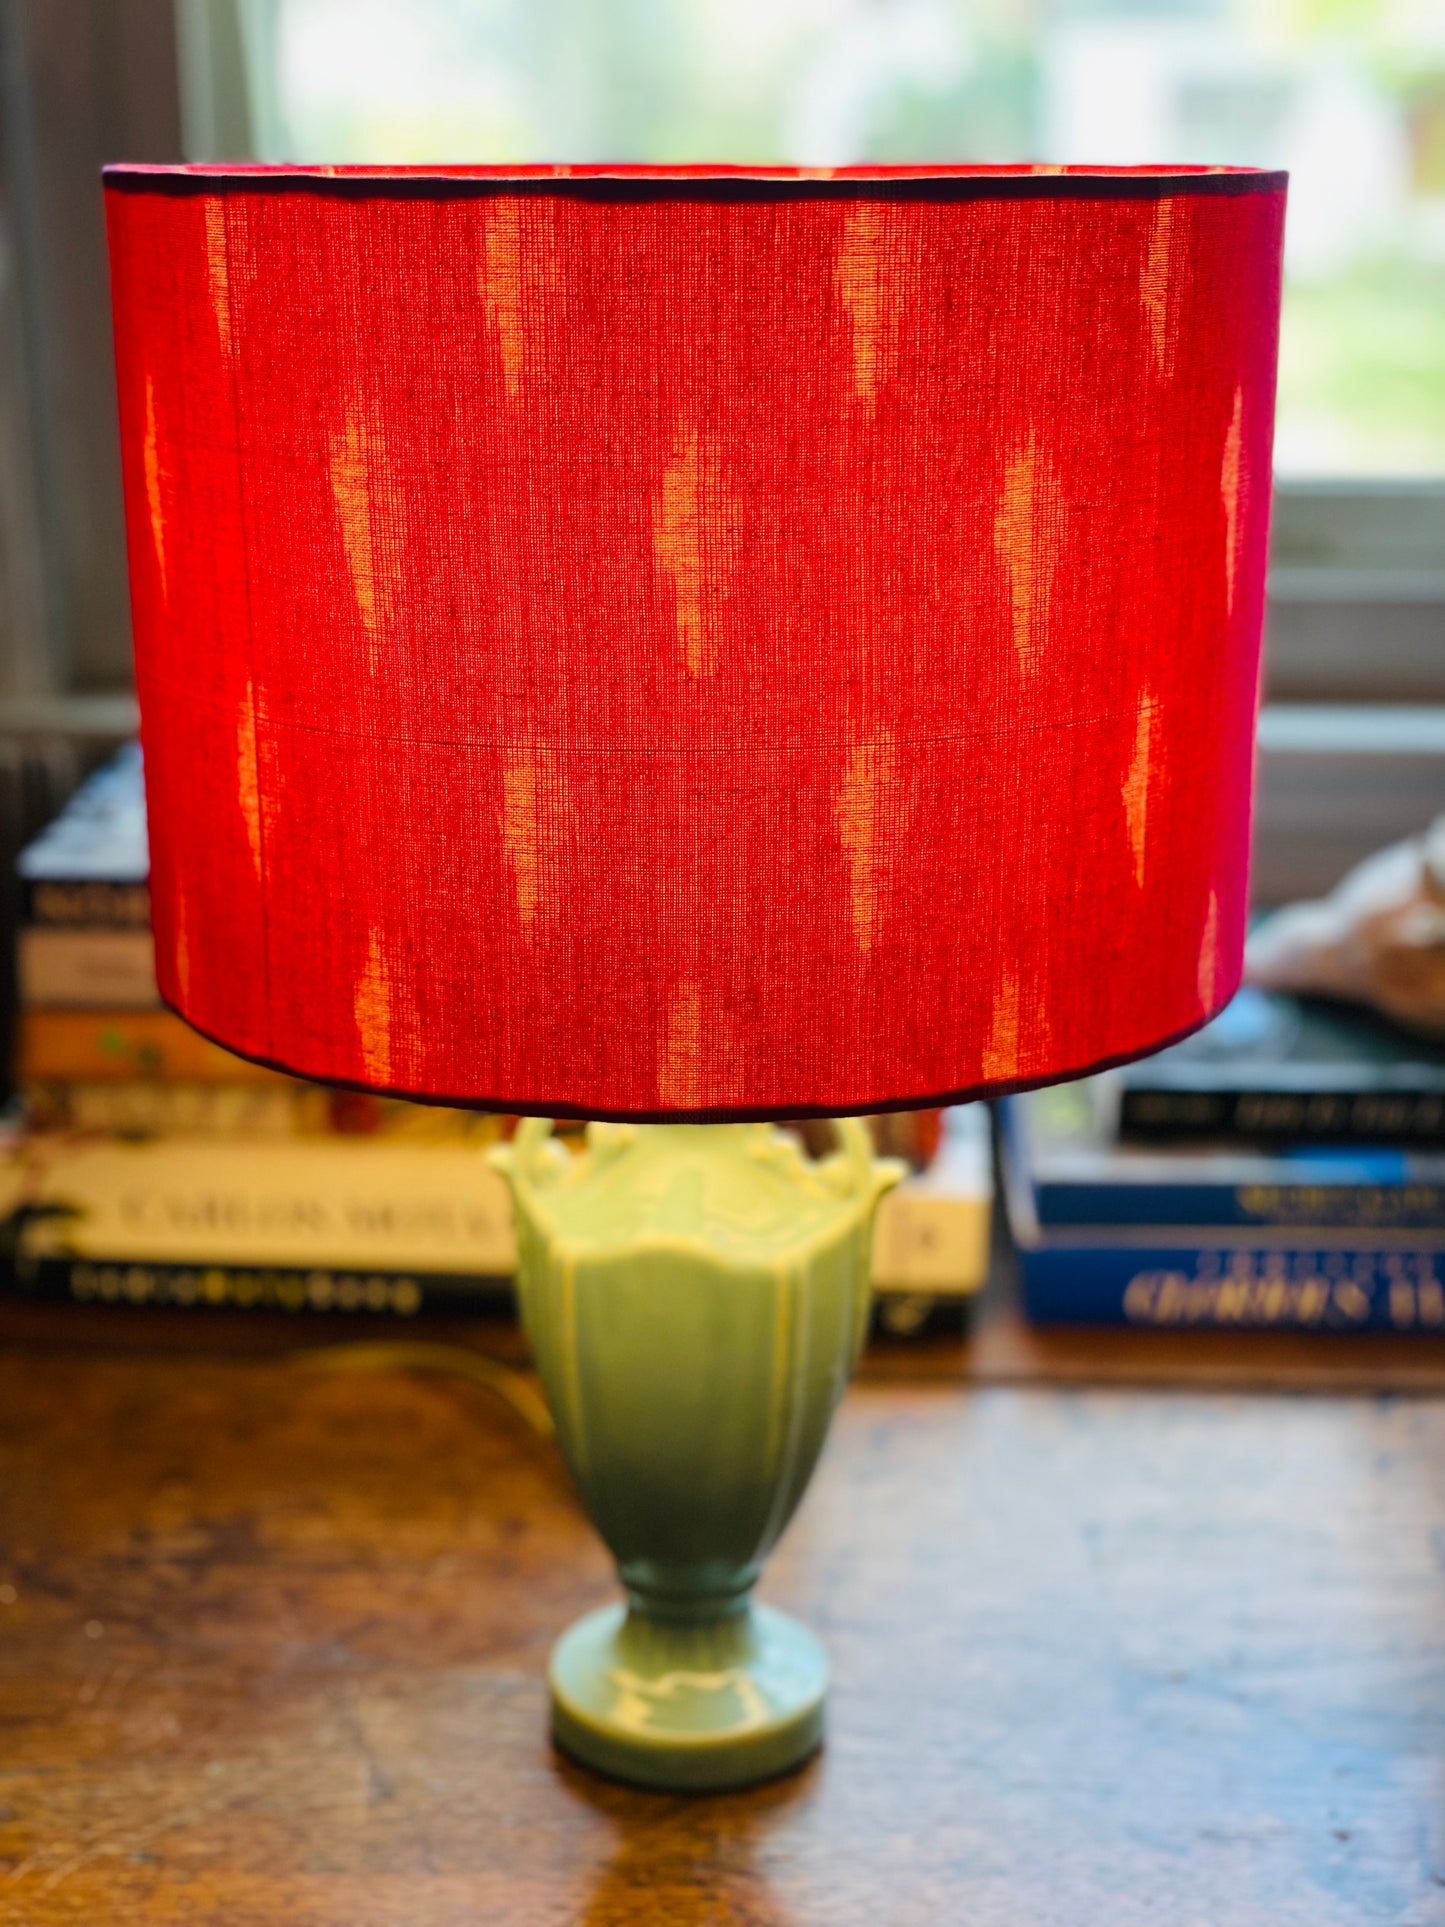 10 inch Drum Lampshade. Bright Pink Pochampally Ikat Cotton from India.